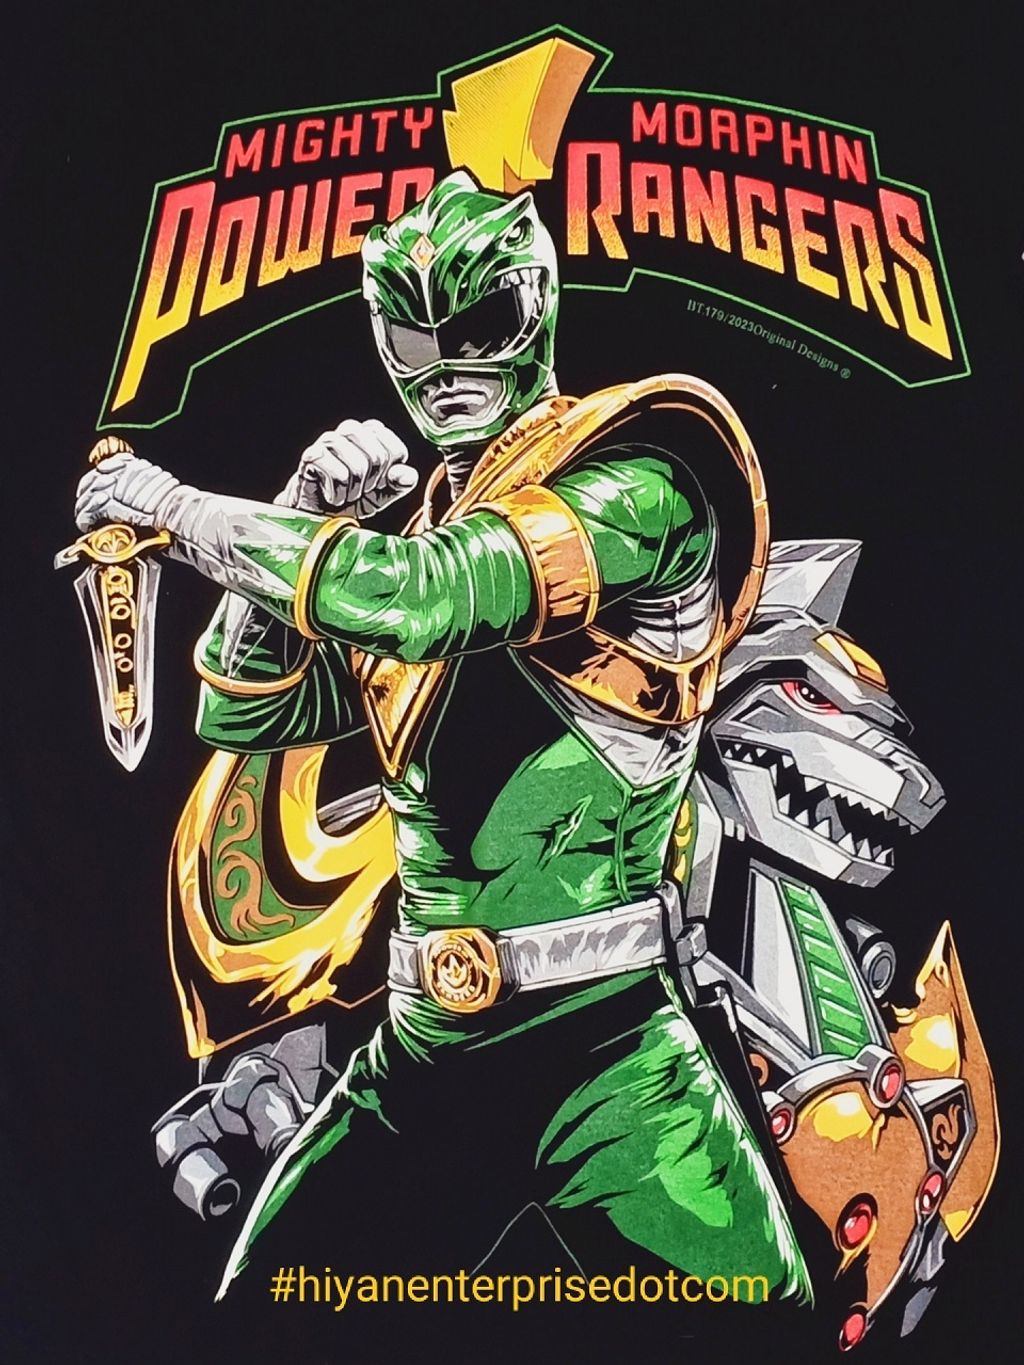 BT179 GREEN MIGHTY MORPHIN POWER RANGERS LIMITED COLLECTORS EDITION  ORIGINAL BLACK TIMBER COTTON T-SHIRT